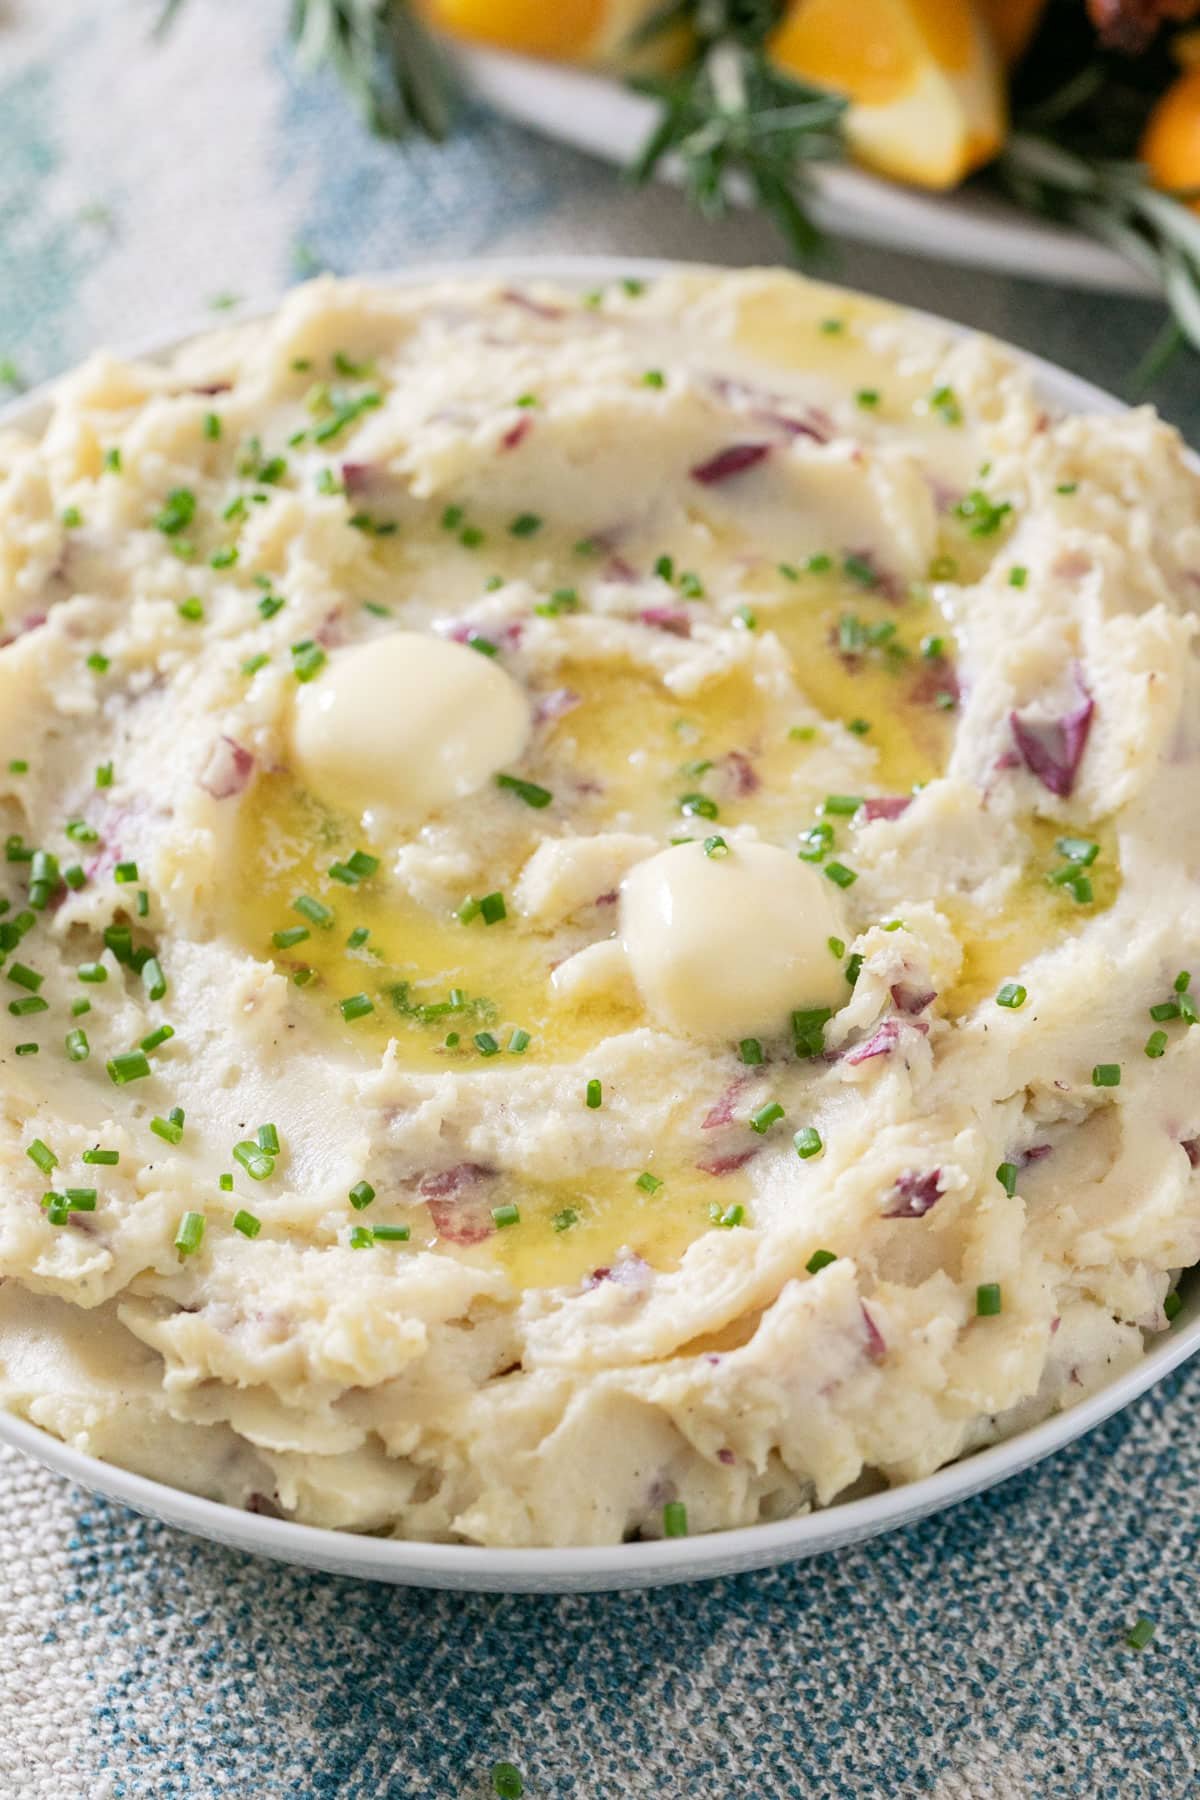 A close up image of mashed potatoes with butter and chives in a white bowl.